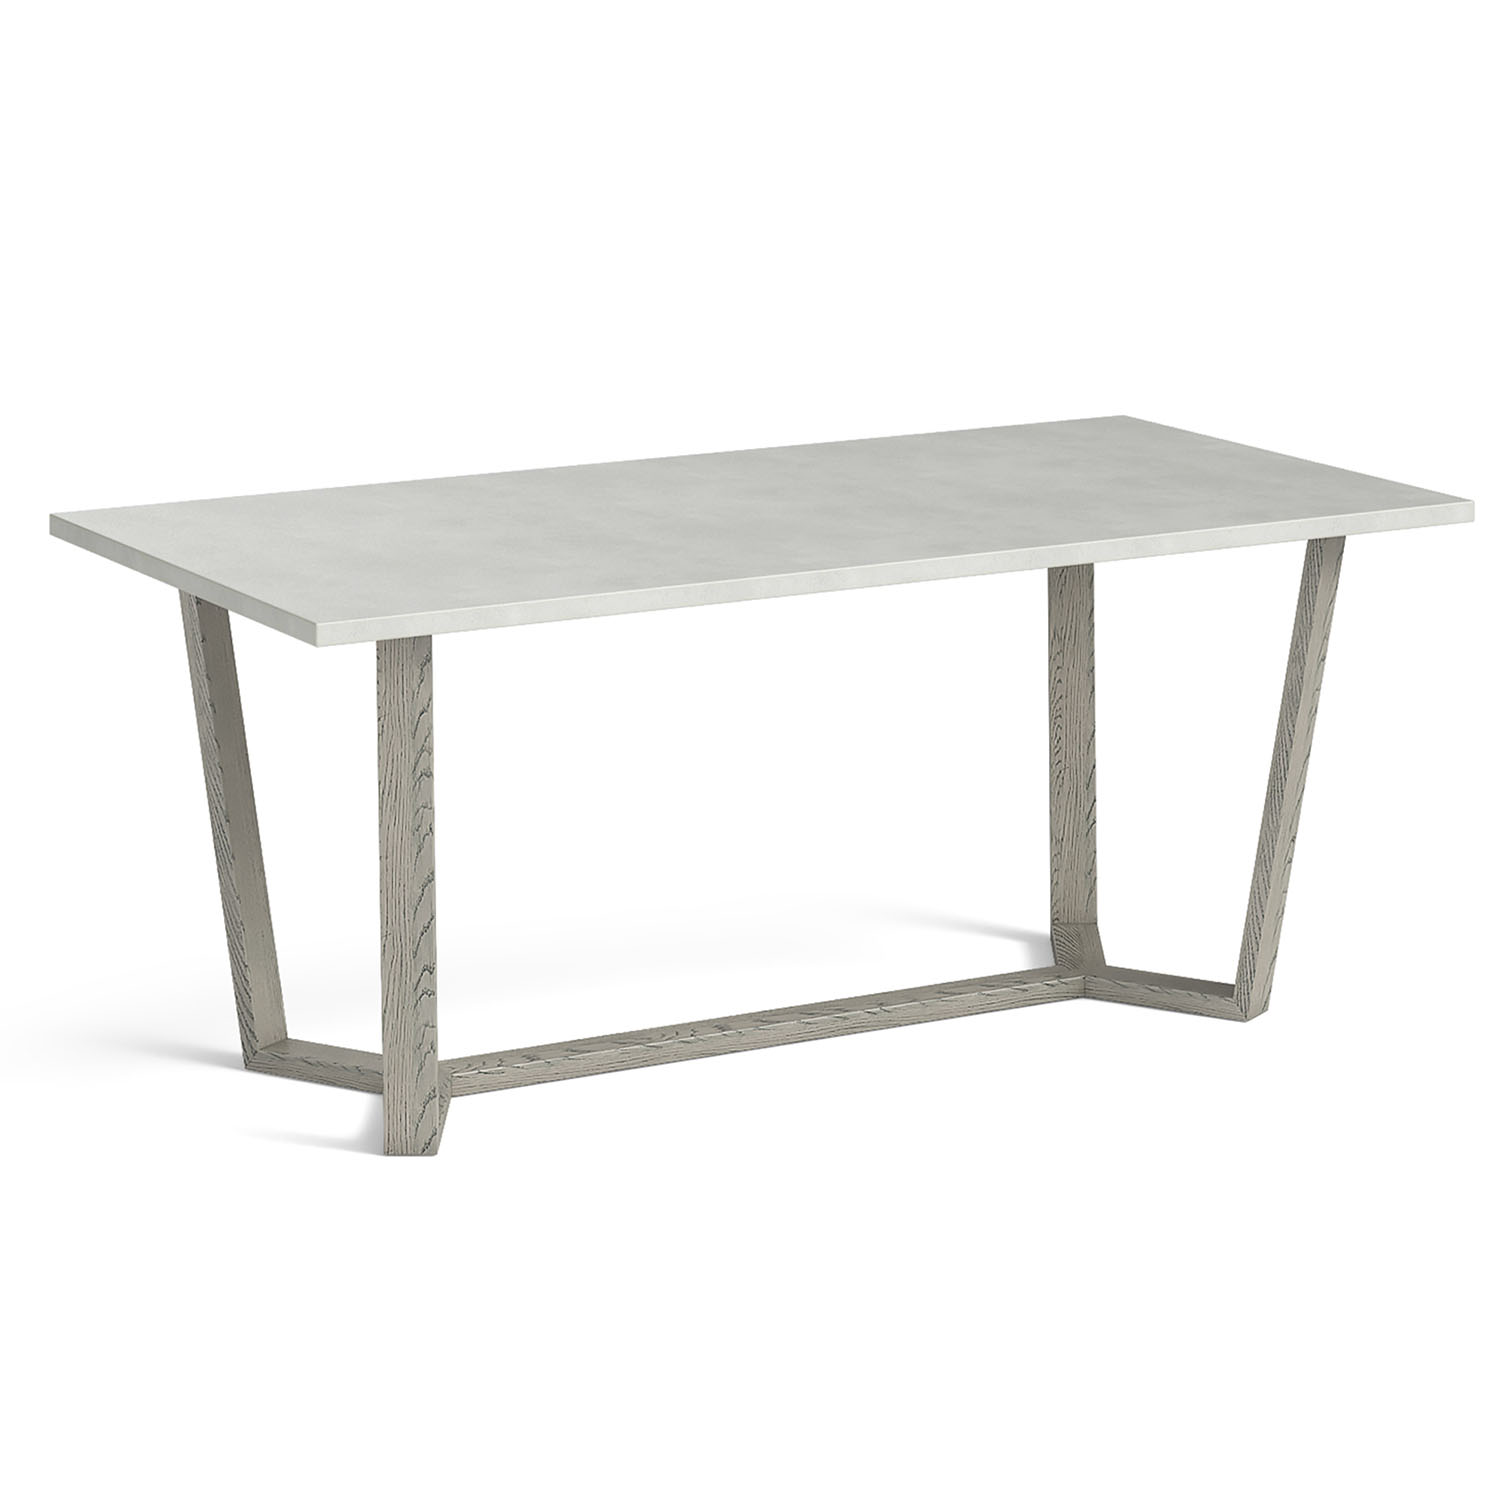 Harbour 210cm Dining Table